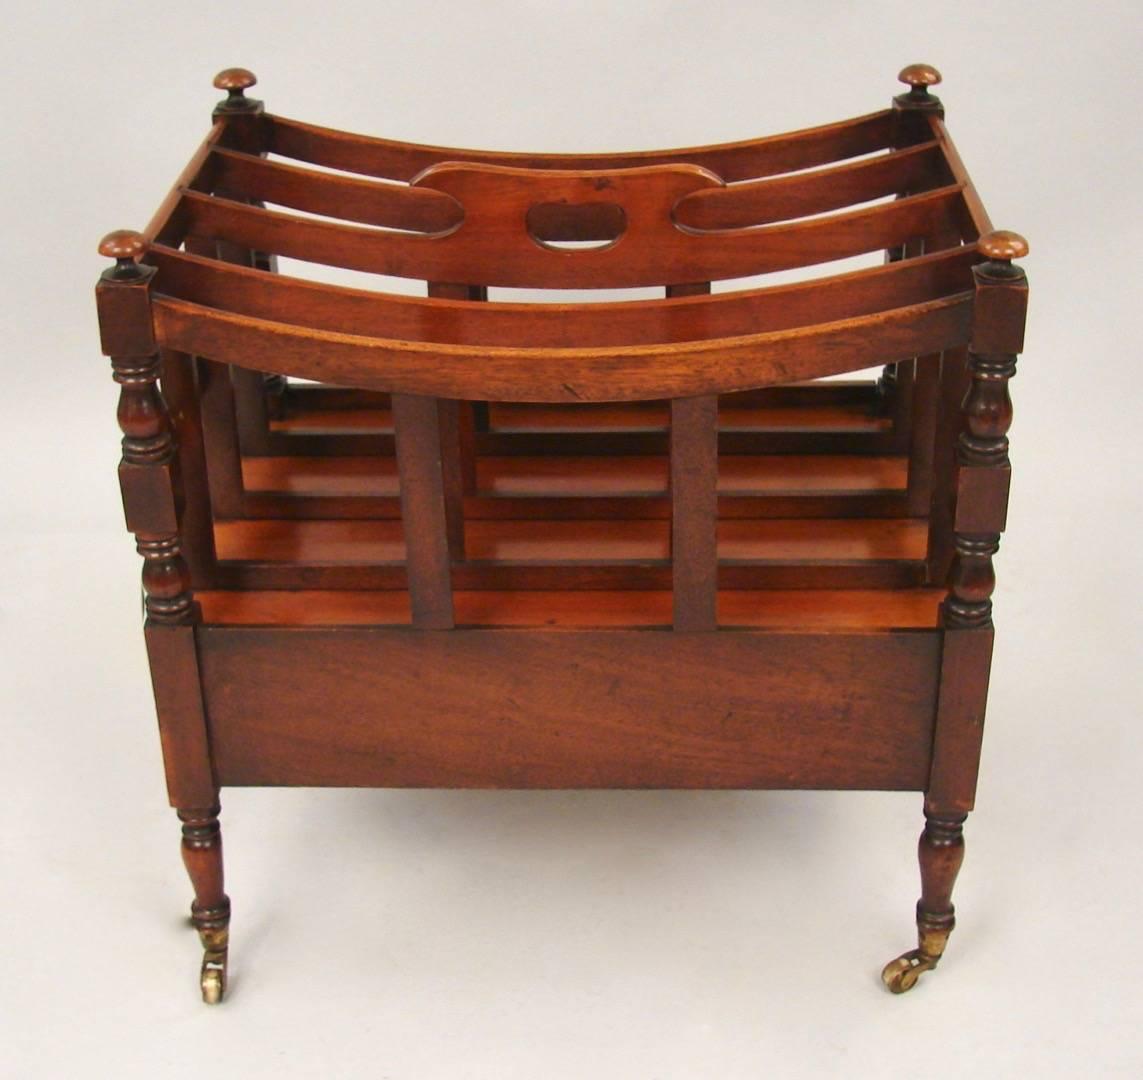 A Regency period mahogany canterbury with carrying handle, the curved four sections divides over a single drawer, supported on turned legs ending in original brass casters. Attractive warm color, circa 1825.